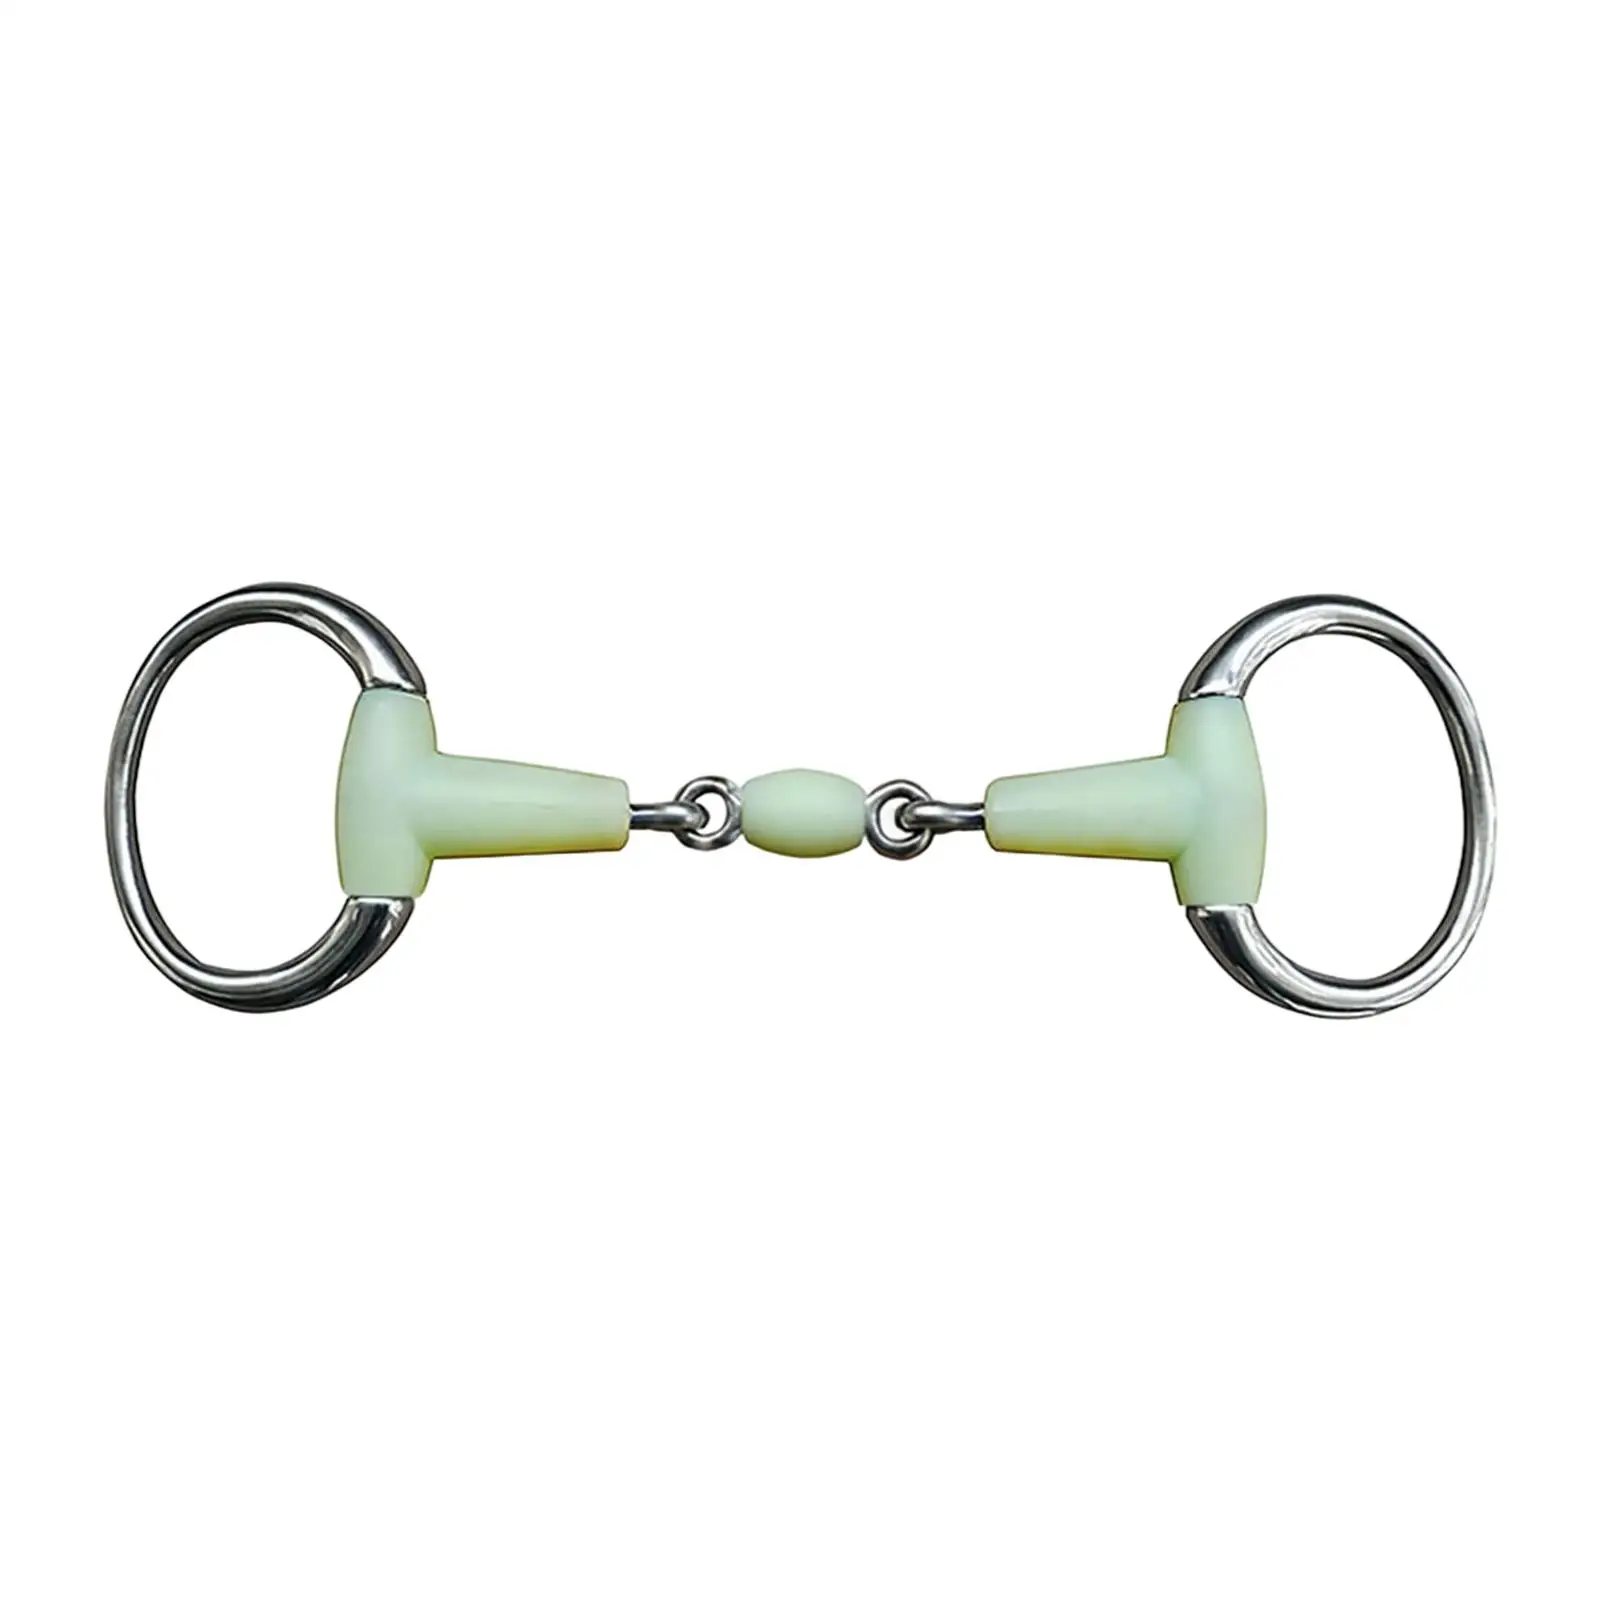 Durable Horse Ring Bit Horse Training Tool Heavy Duty Equestrian Accessories Stainless Steel for Outdoor Gear